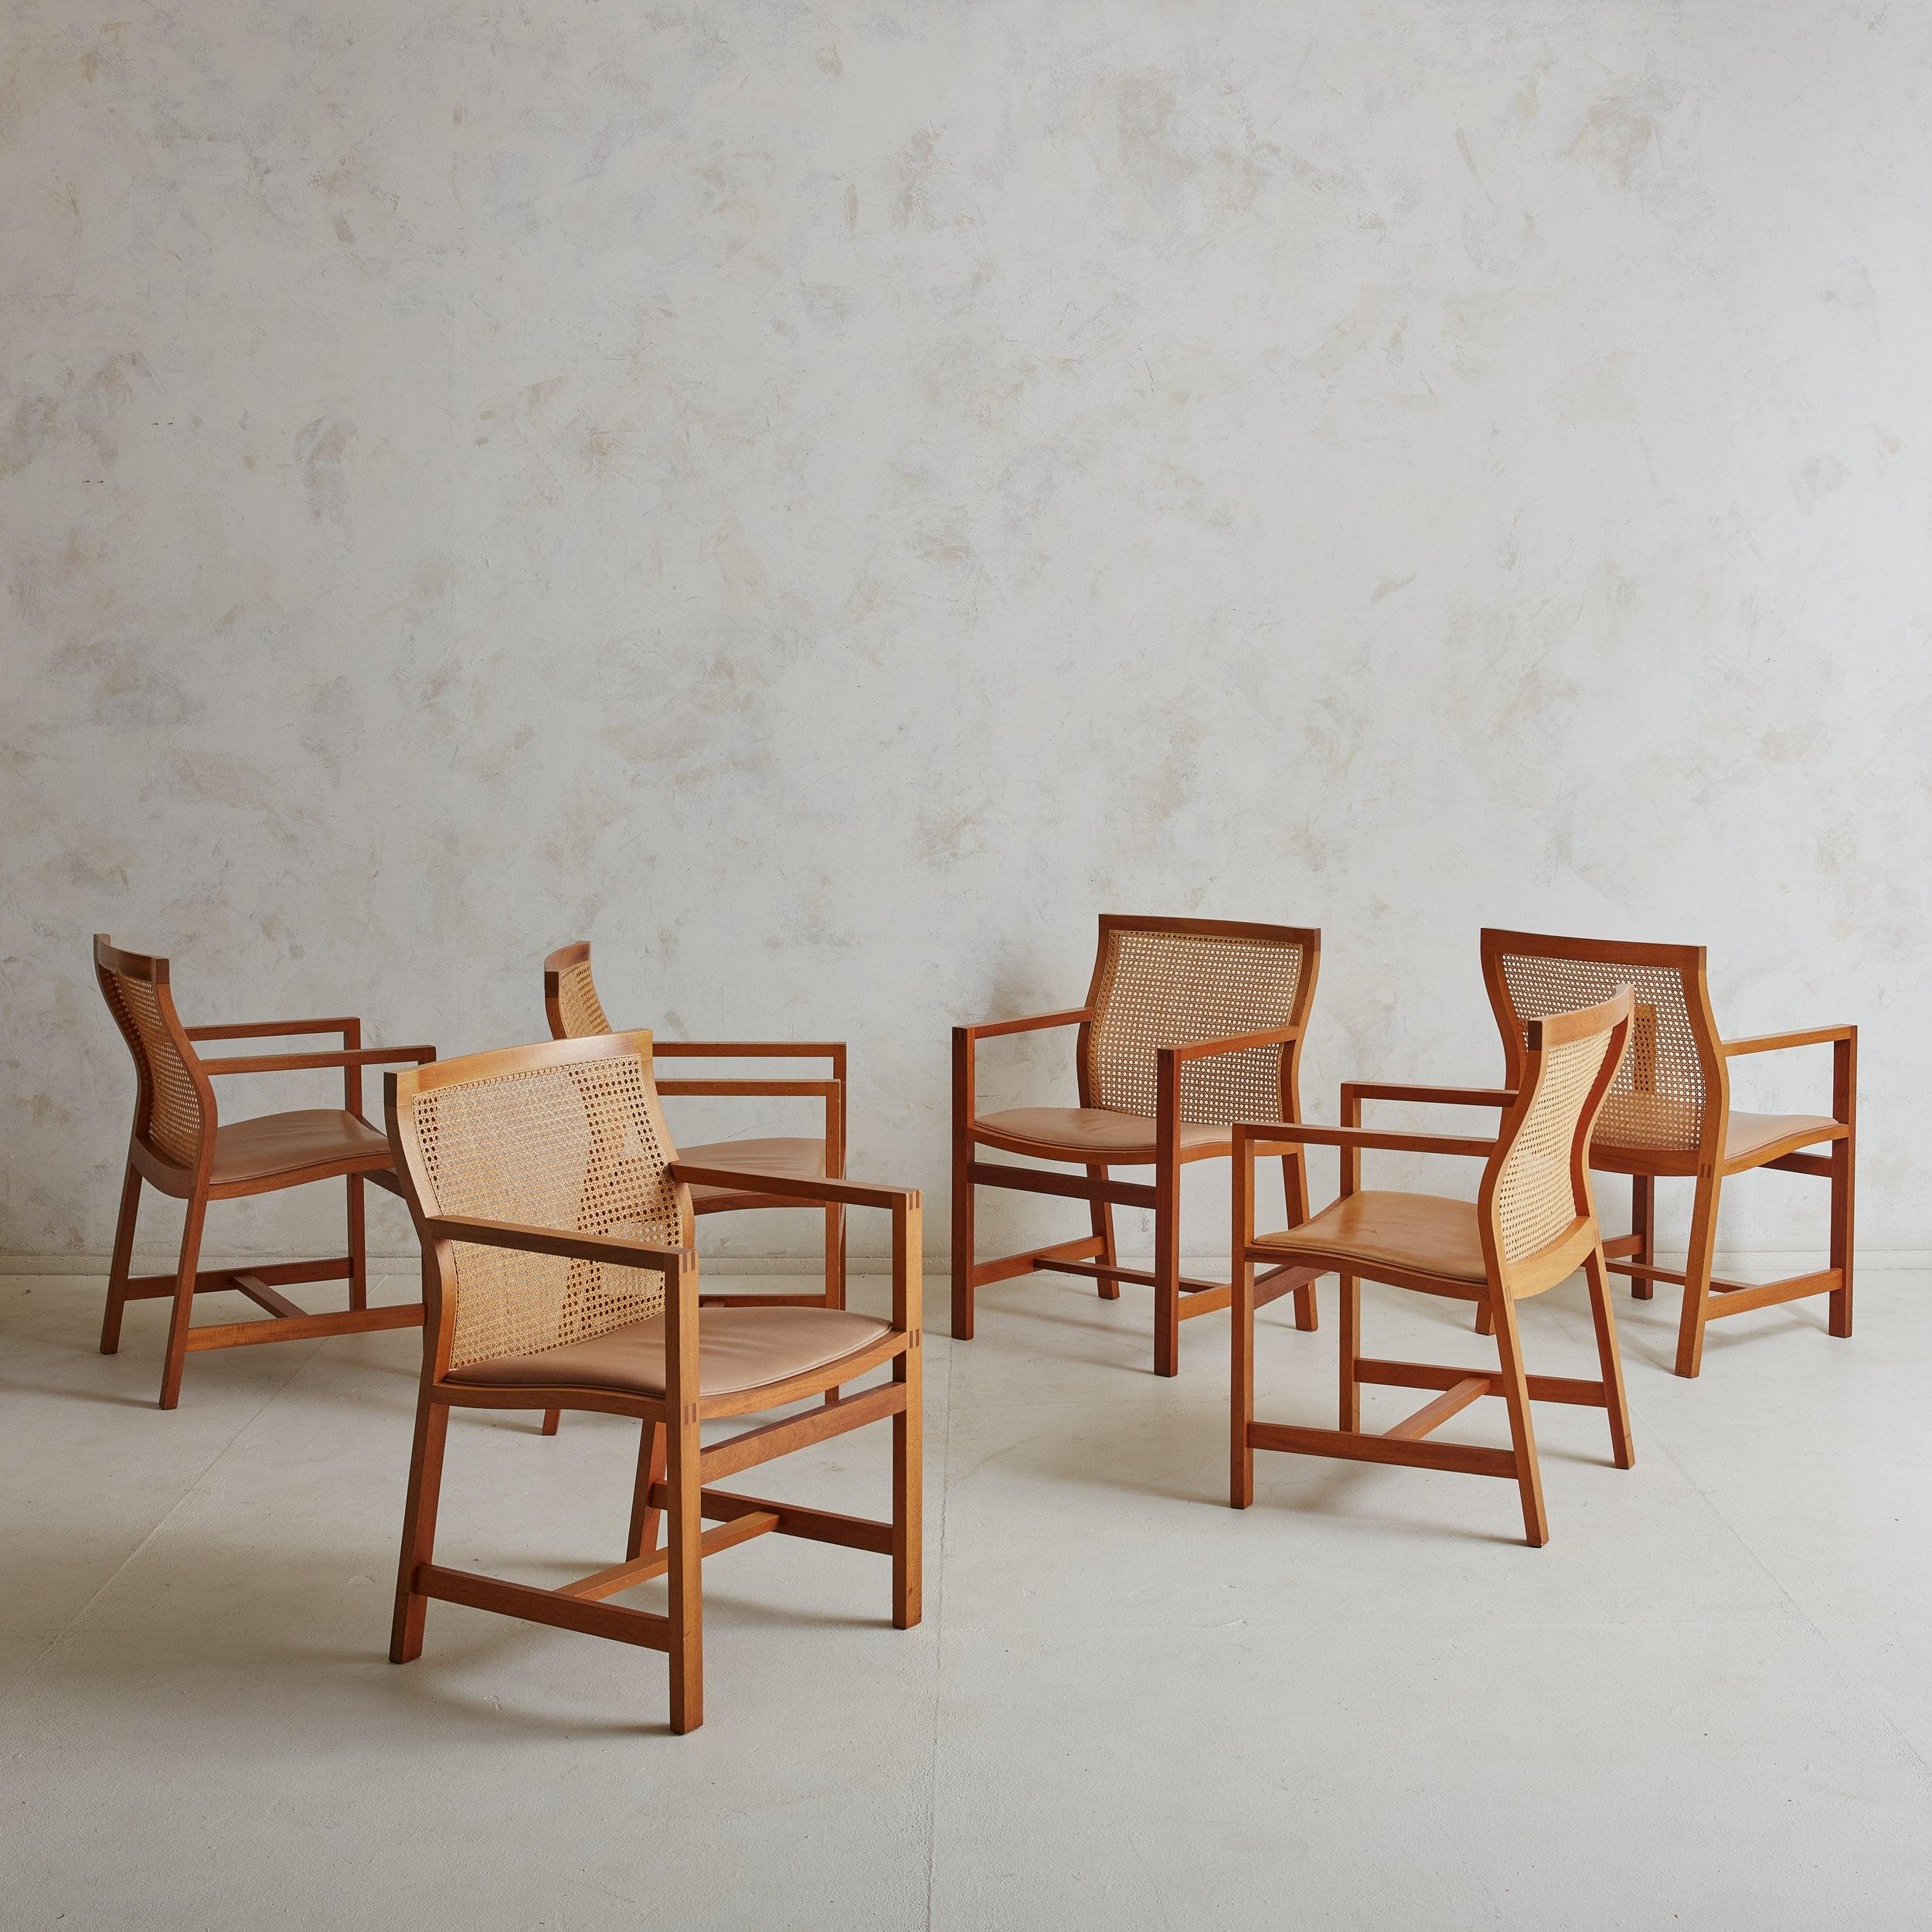 Set of 6 Danish Modern cane and cherry wood dining chairs designed by Rud Thygesen and Johnny Sorensen for Botium in the 1980s. These exceptionally crafted dining chairs are constructed of minimalistic cherry wood frames, patinated tan leather